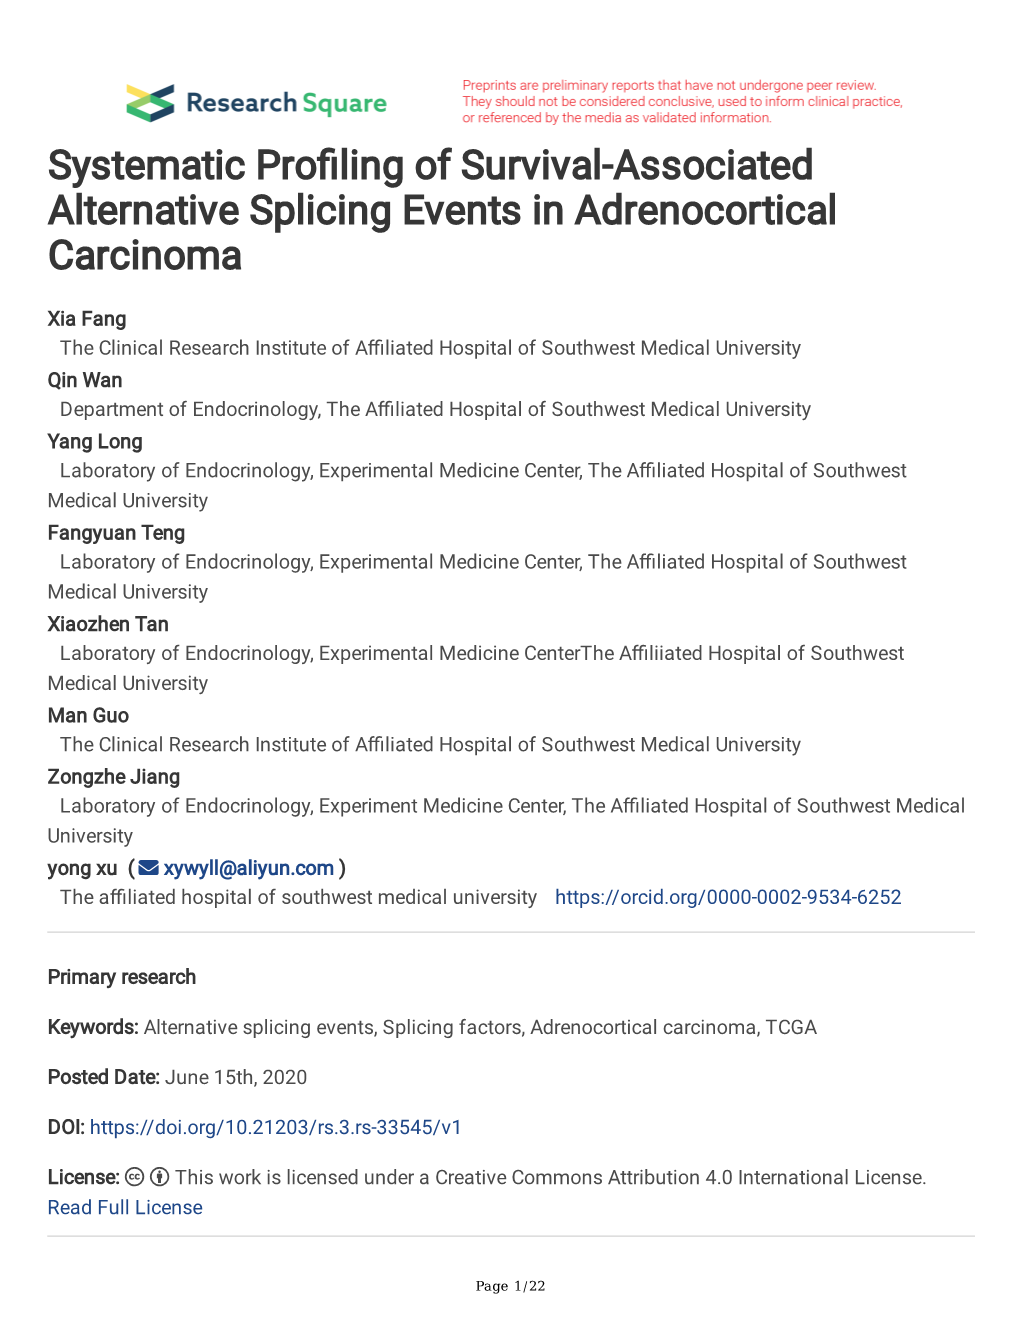 Systematic Pro Ling of Survival-Associated Alternative